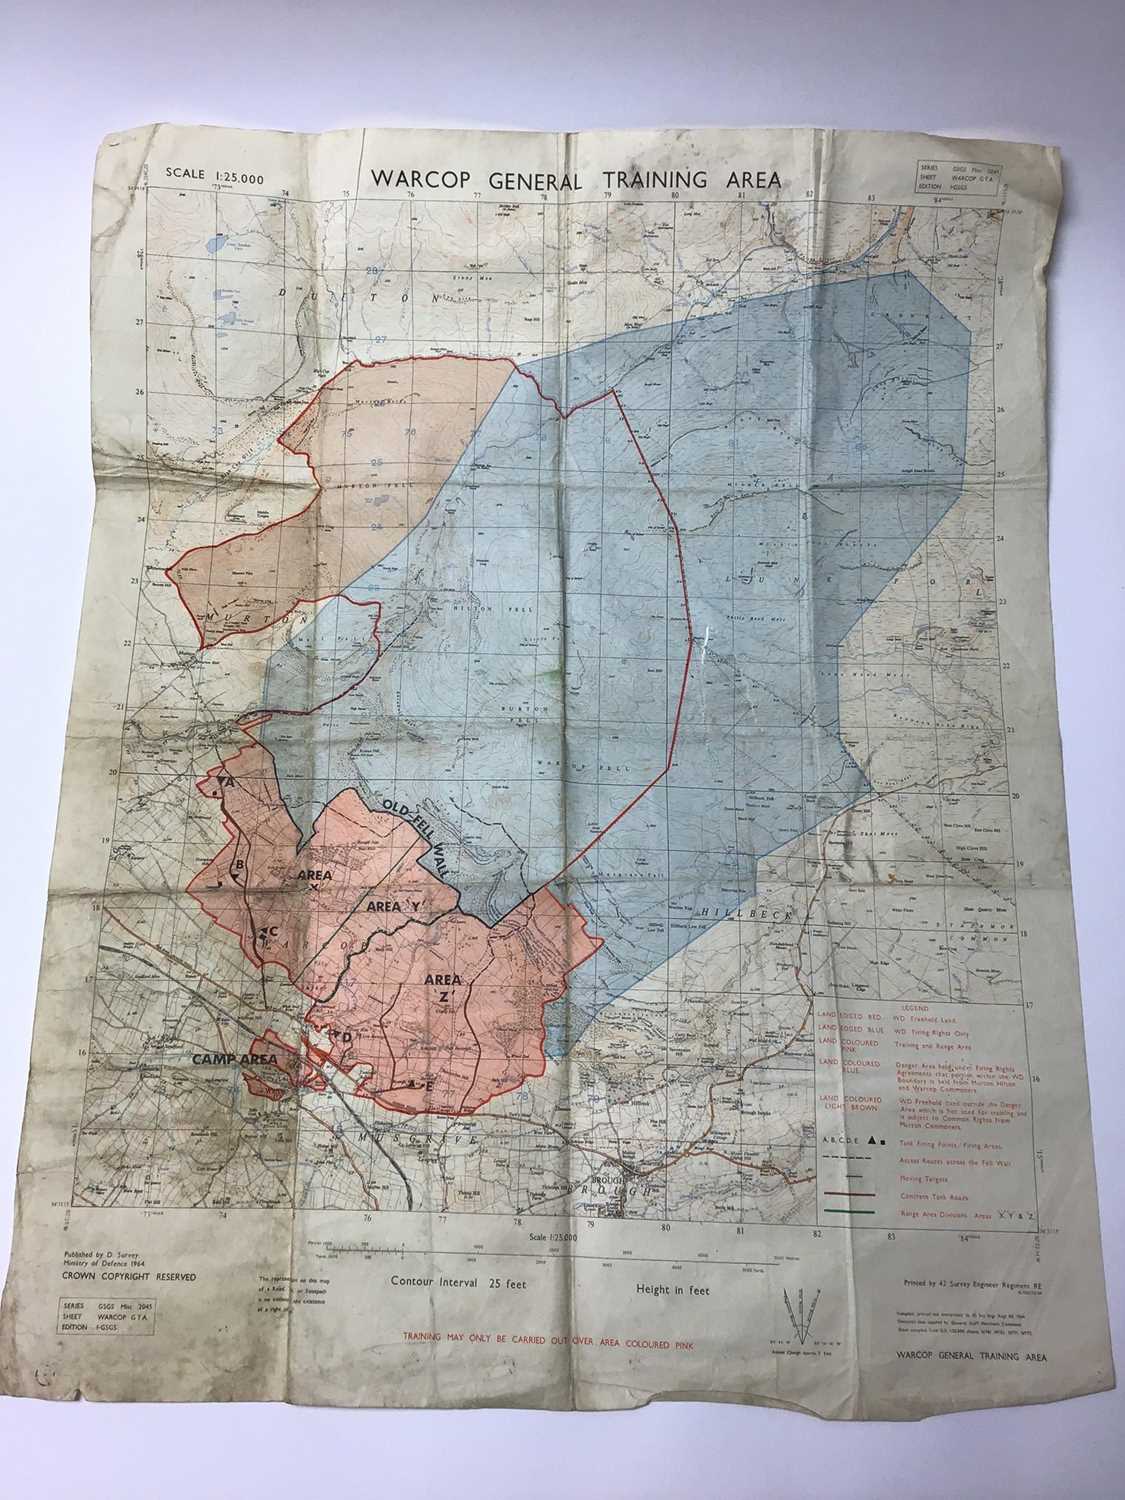 Lot 245 - 1960s Warcop General Training Area map,